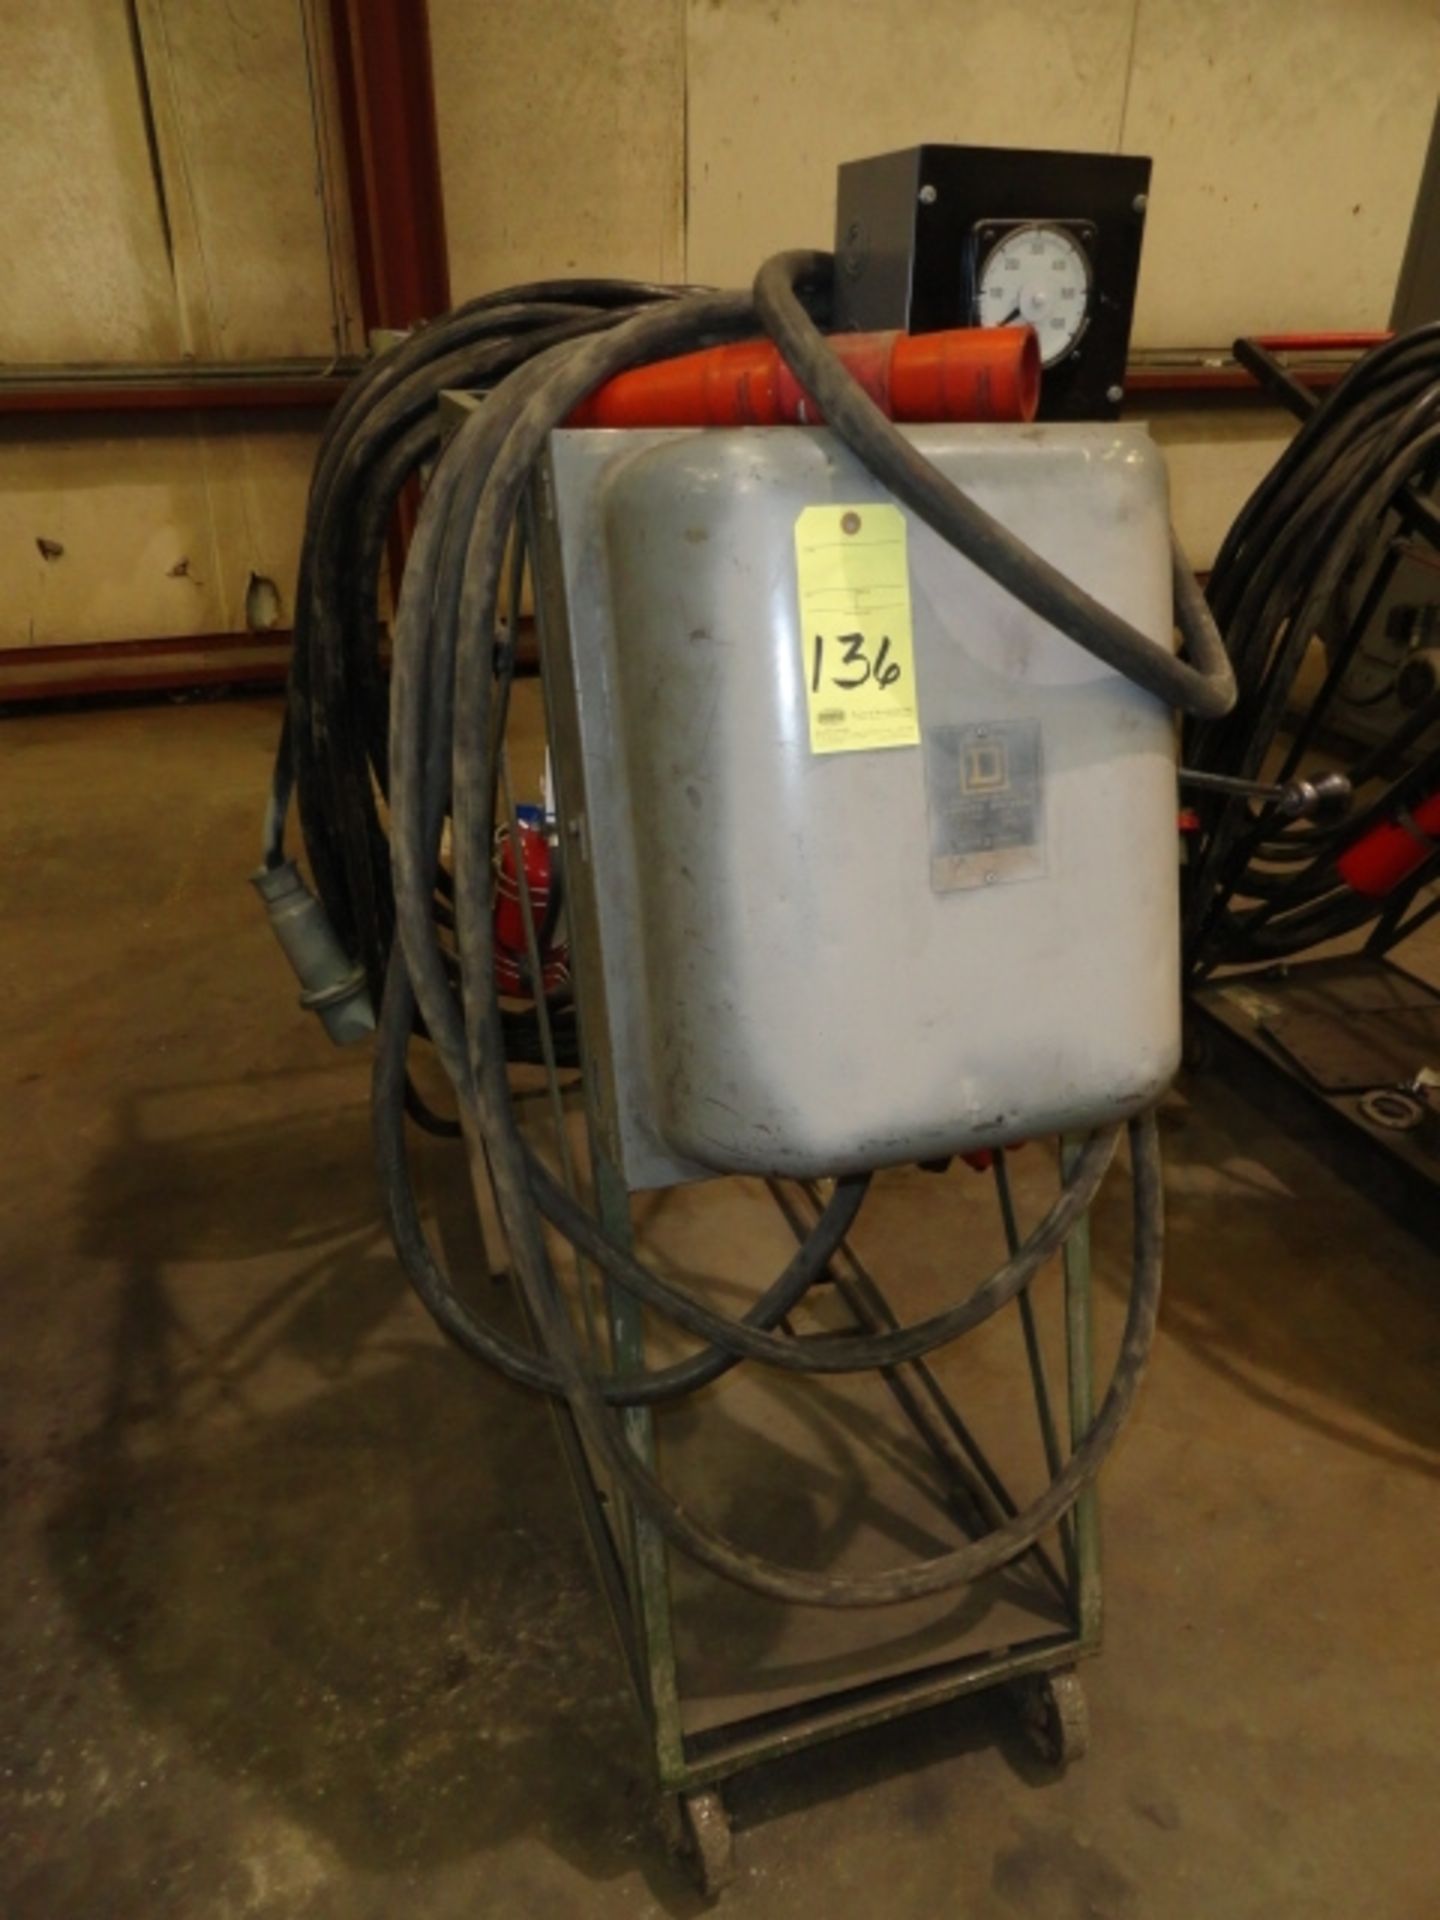 PORTABLE POWER ROLLER CART, SQUARE D, 200 amp dbl. throw switch for phase change, input voltage